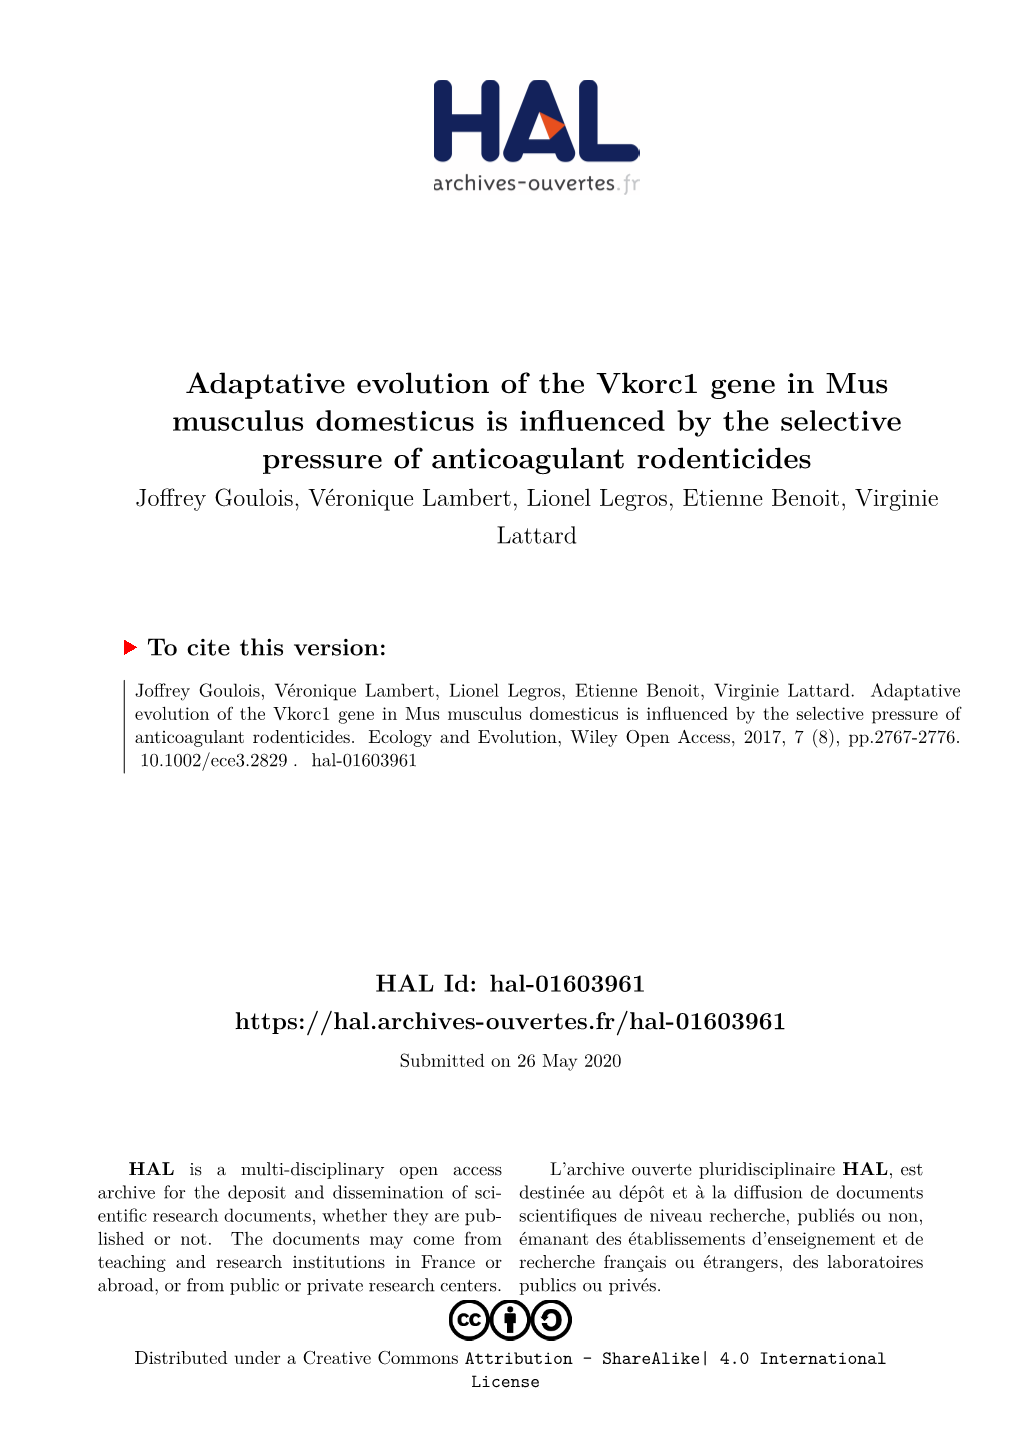 Adaptative Evolution of the Vkorc1 Gene in Mus Musculus Domesticus